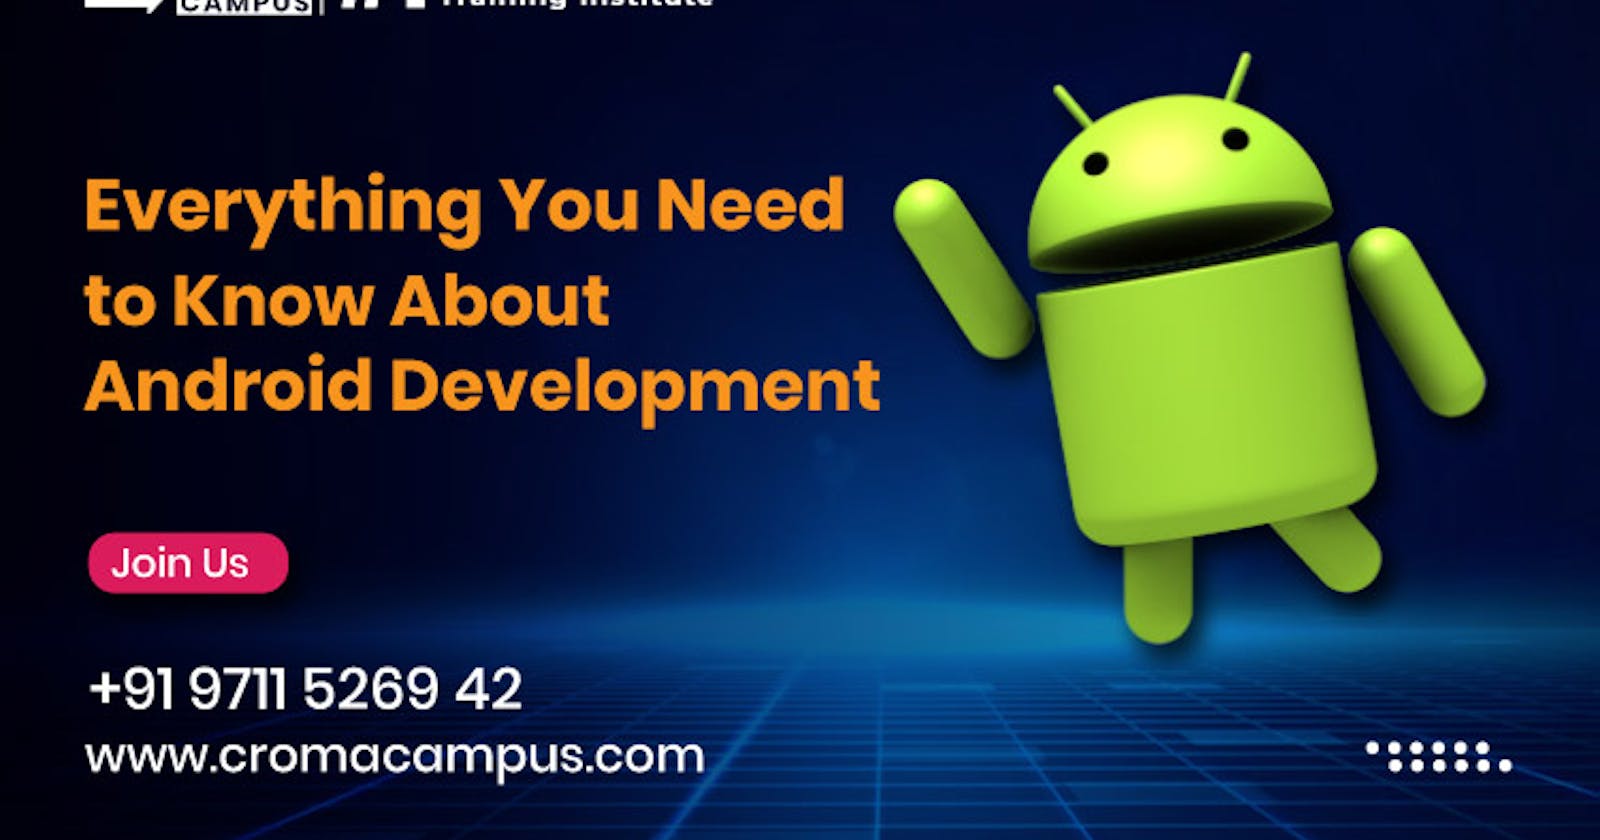 6 Reasons to Learn Android Development